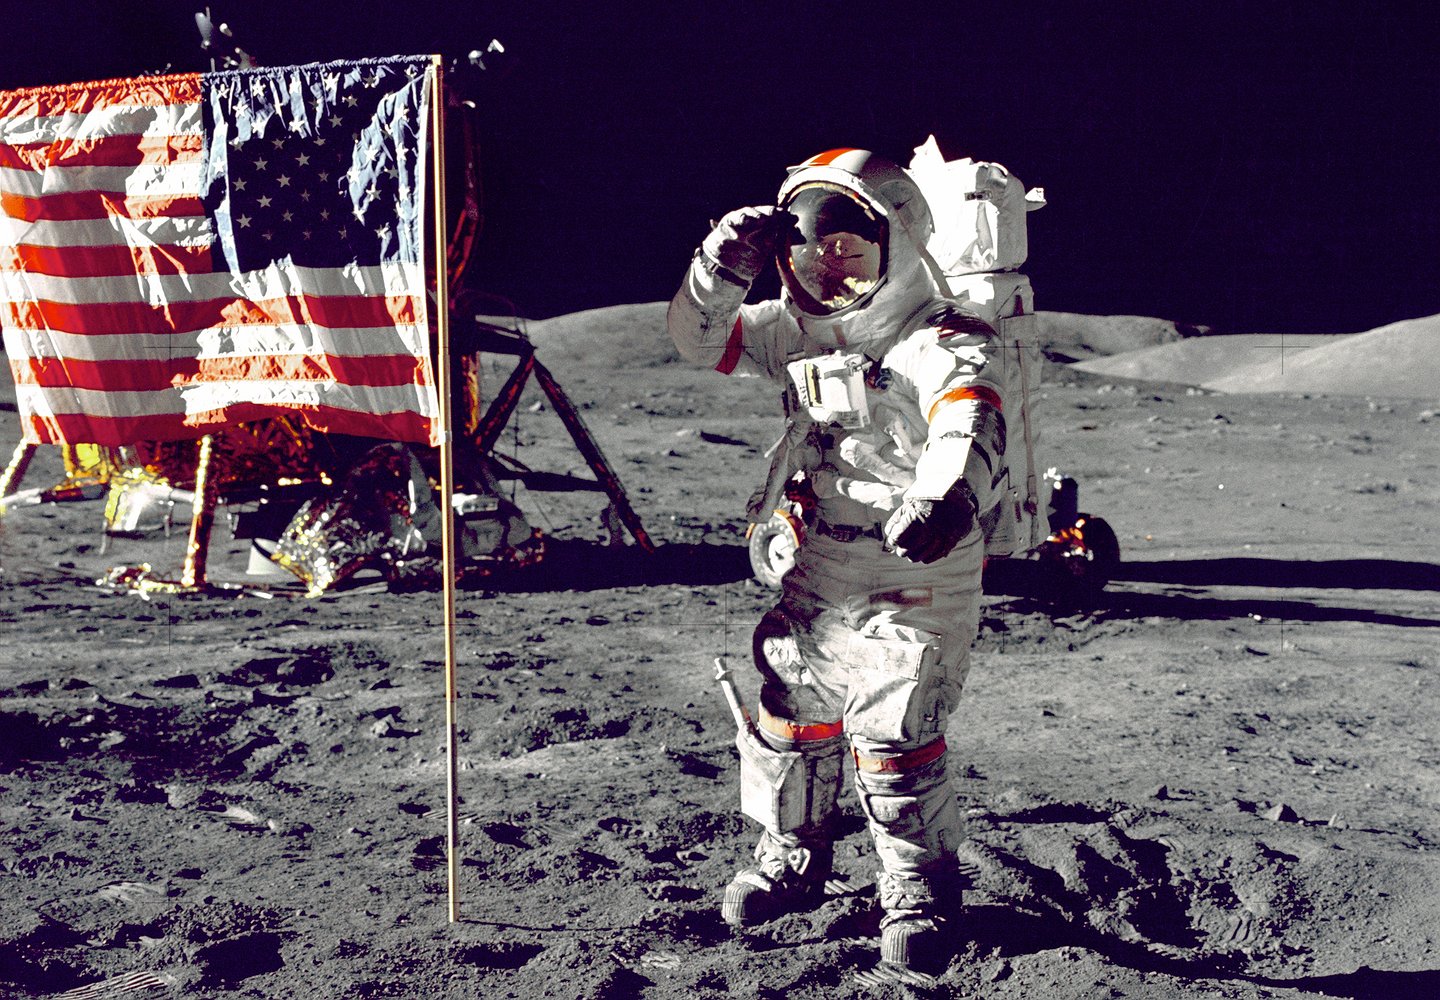 If You Get 11/15 on This Random Knowledge Quiz, You Have Infinite Wisdom neil armstrong on moon